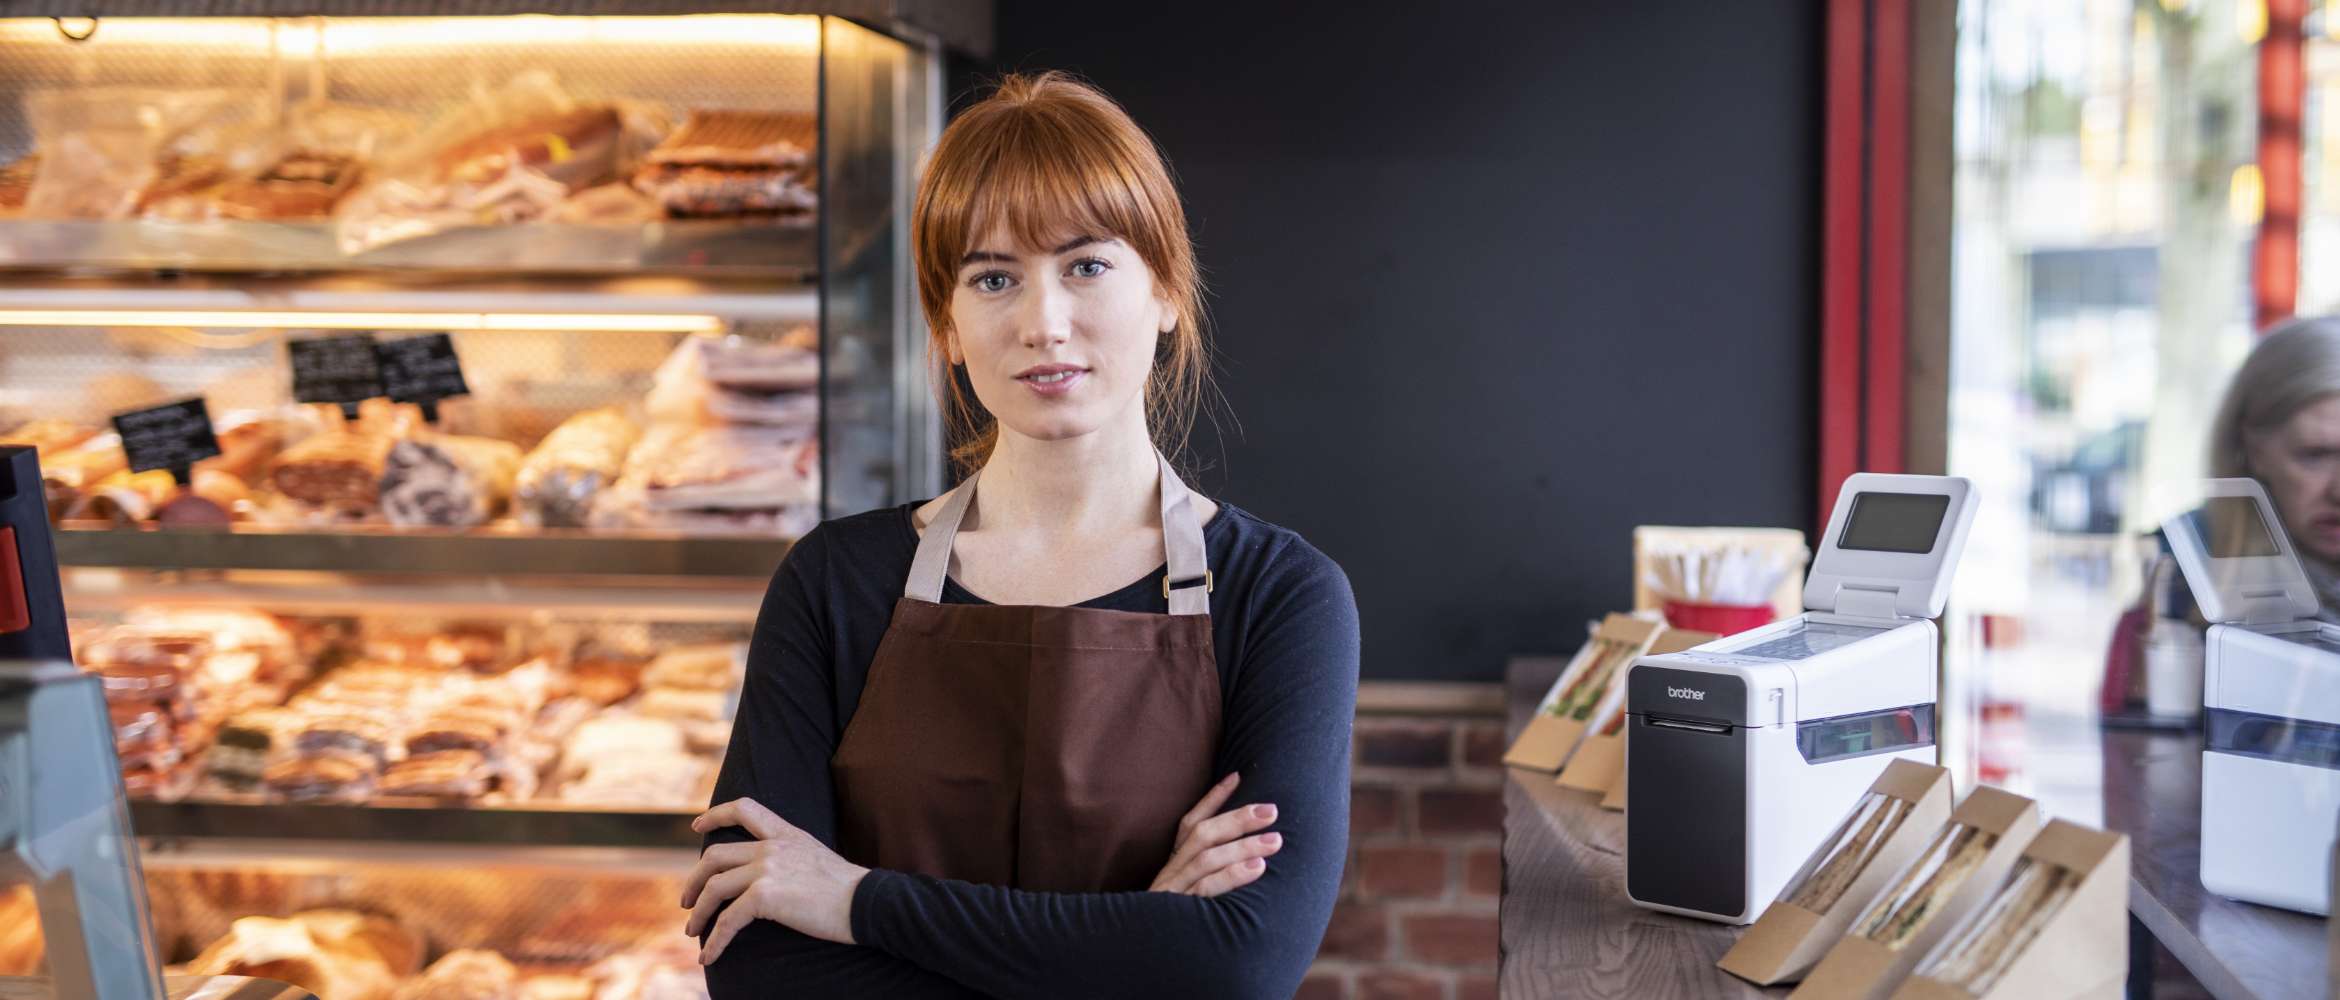 A female member of staff at a retail bakery store is standing arms folded looking to camera. A Brother label printer is in the background.